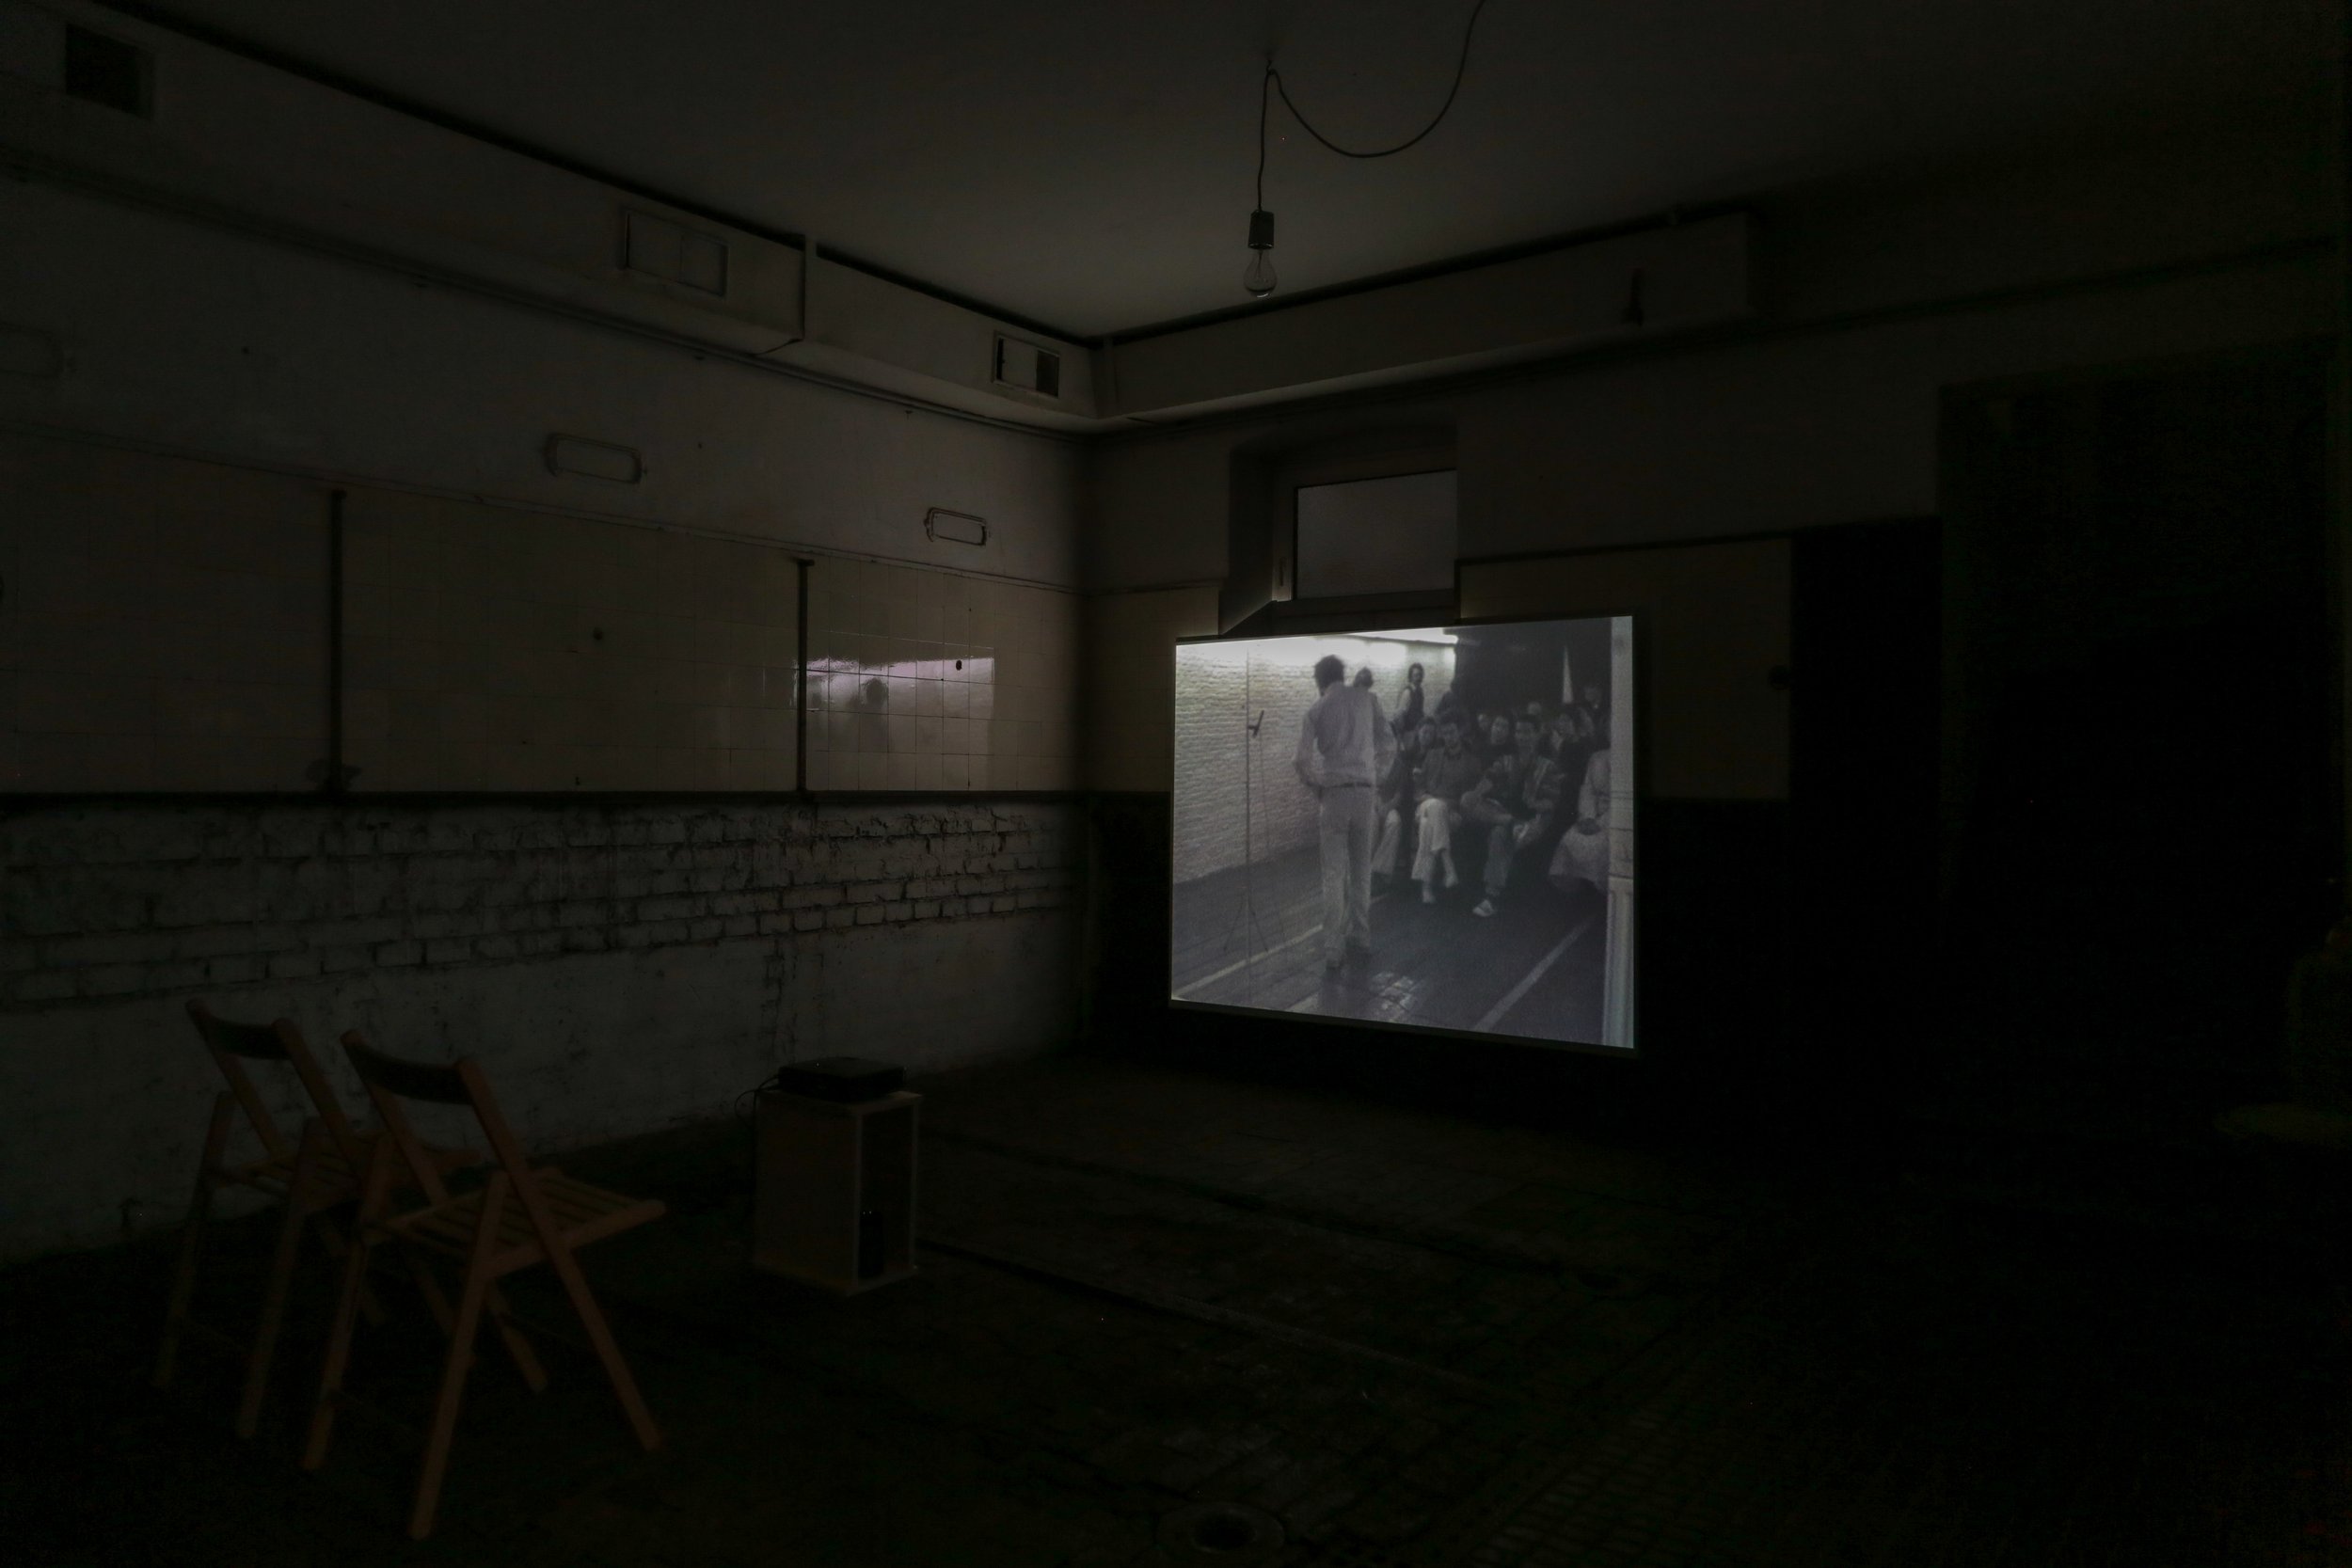   fig4 installation view Dan Graham, Audience/Performer/Mirror, 1977, 00:17:45., In collections: De Appel, LIMA  